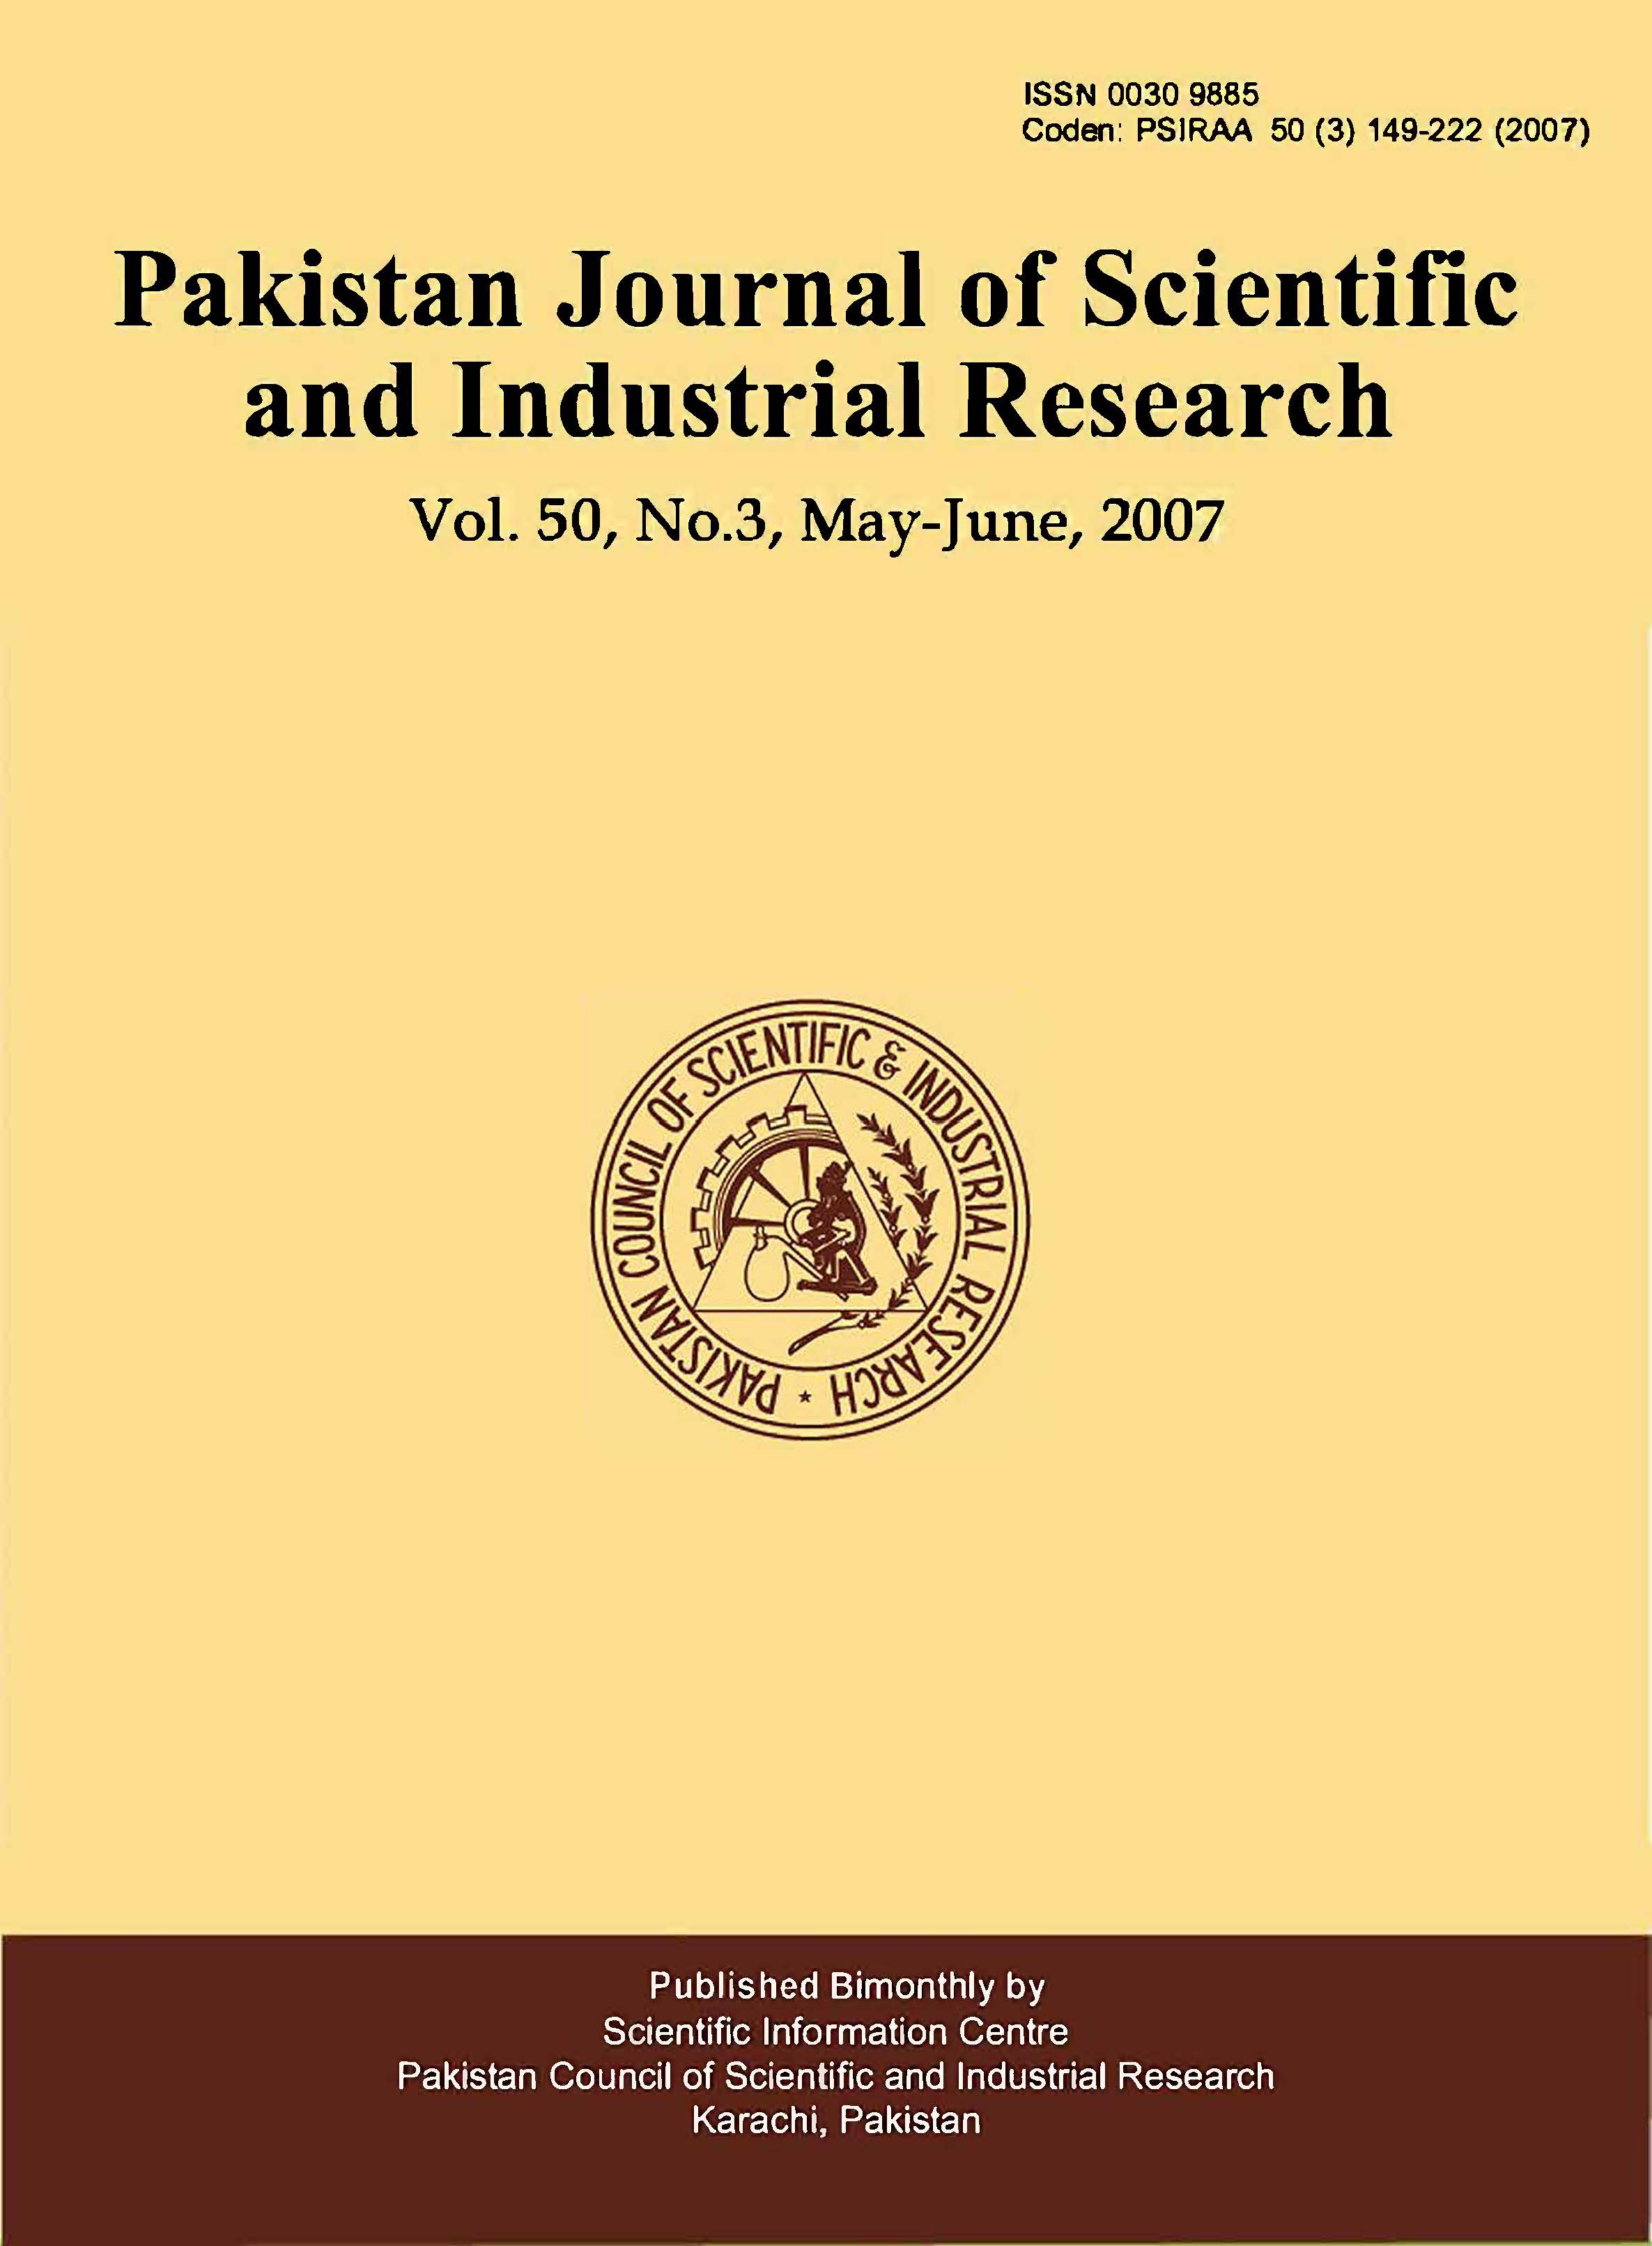 					View Vol. 50 No. 3 (2007): Pakistan Journal of Scientific and Industrial Research
				